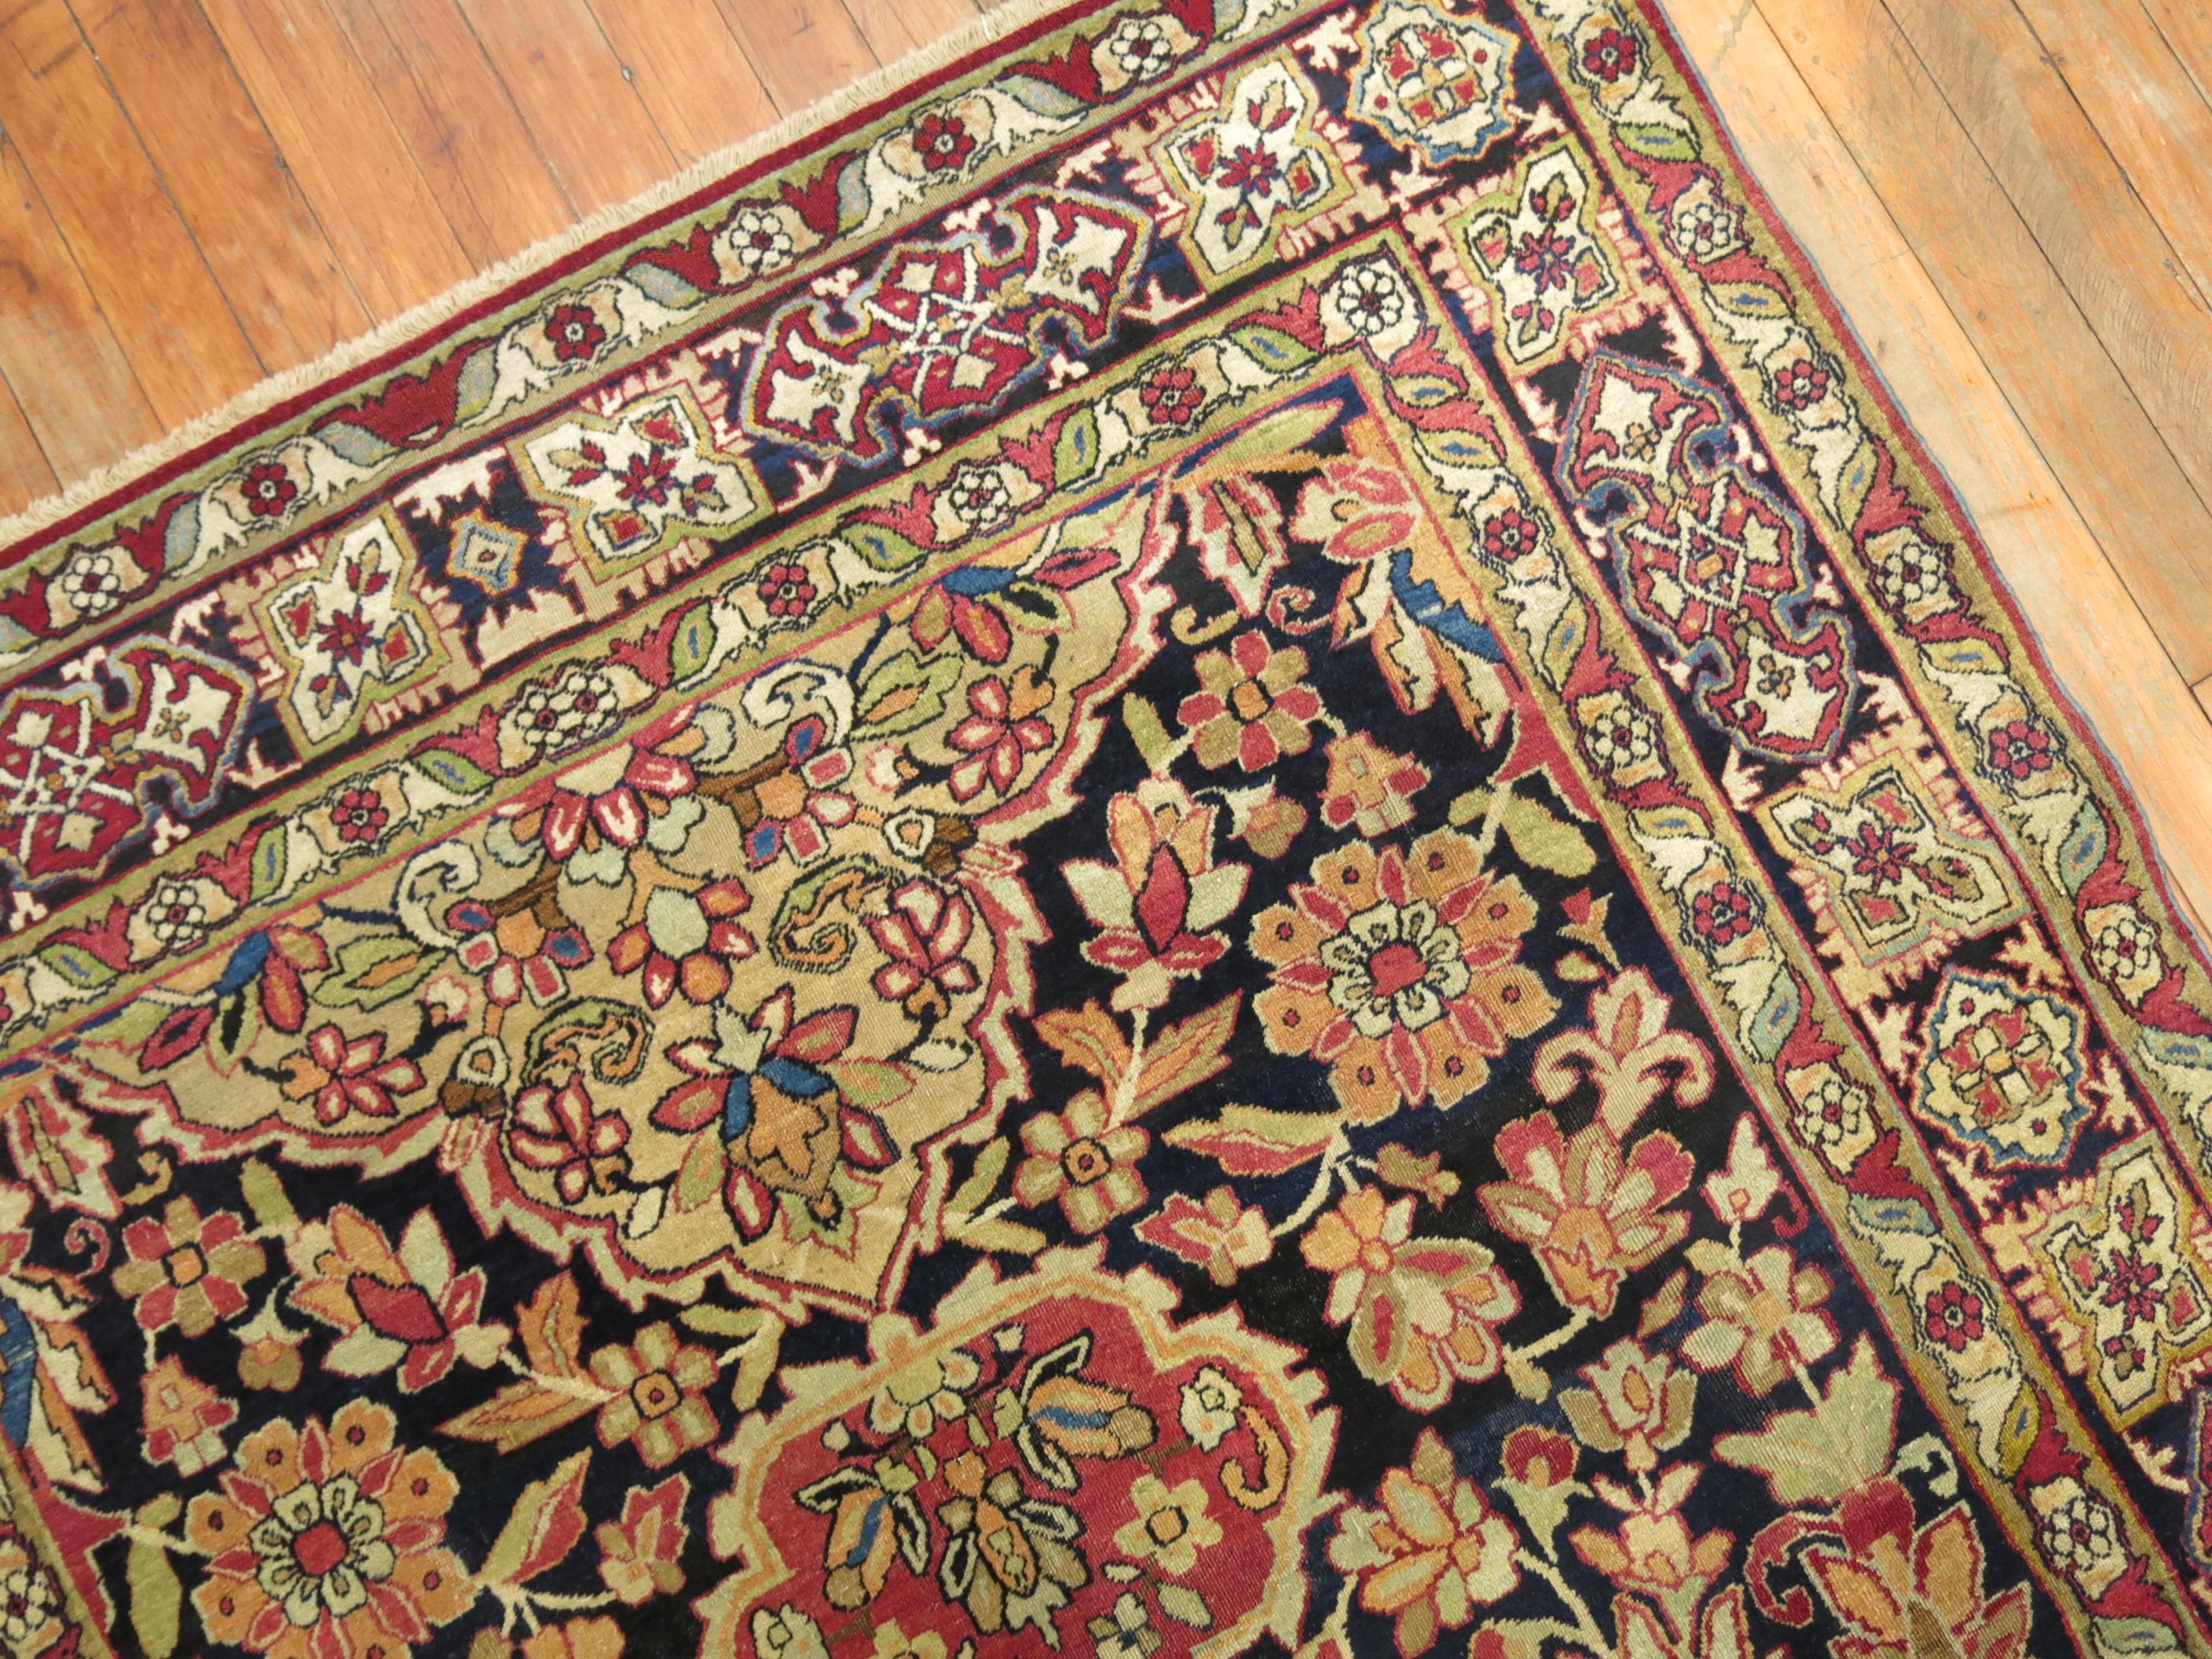 Zabihi Collection Lavar Kerman Collectible Caliber 19th century Rug In Good Condition For Sale In New York, NY